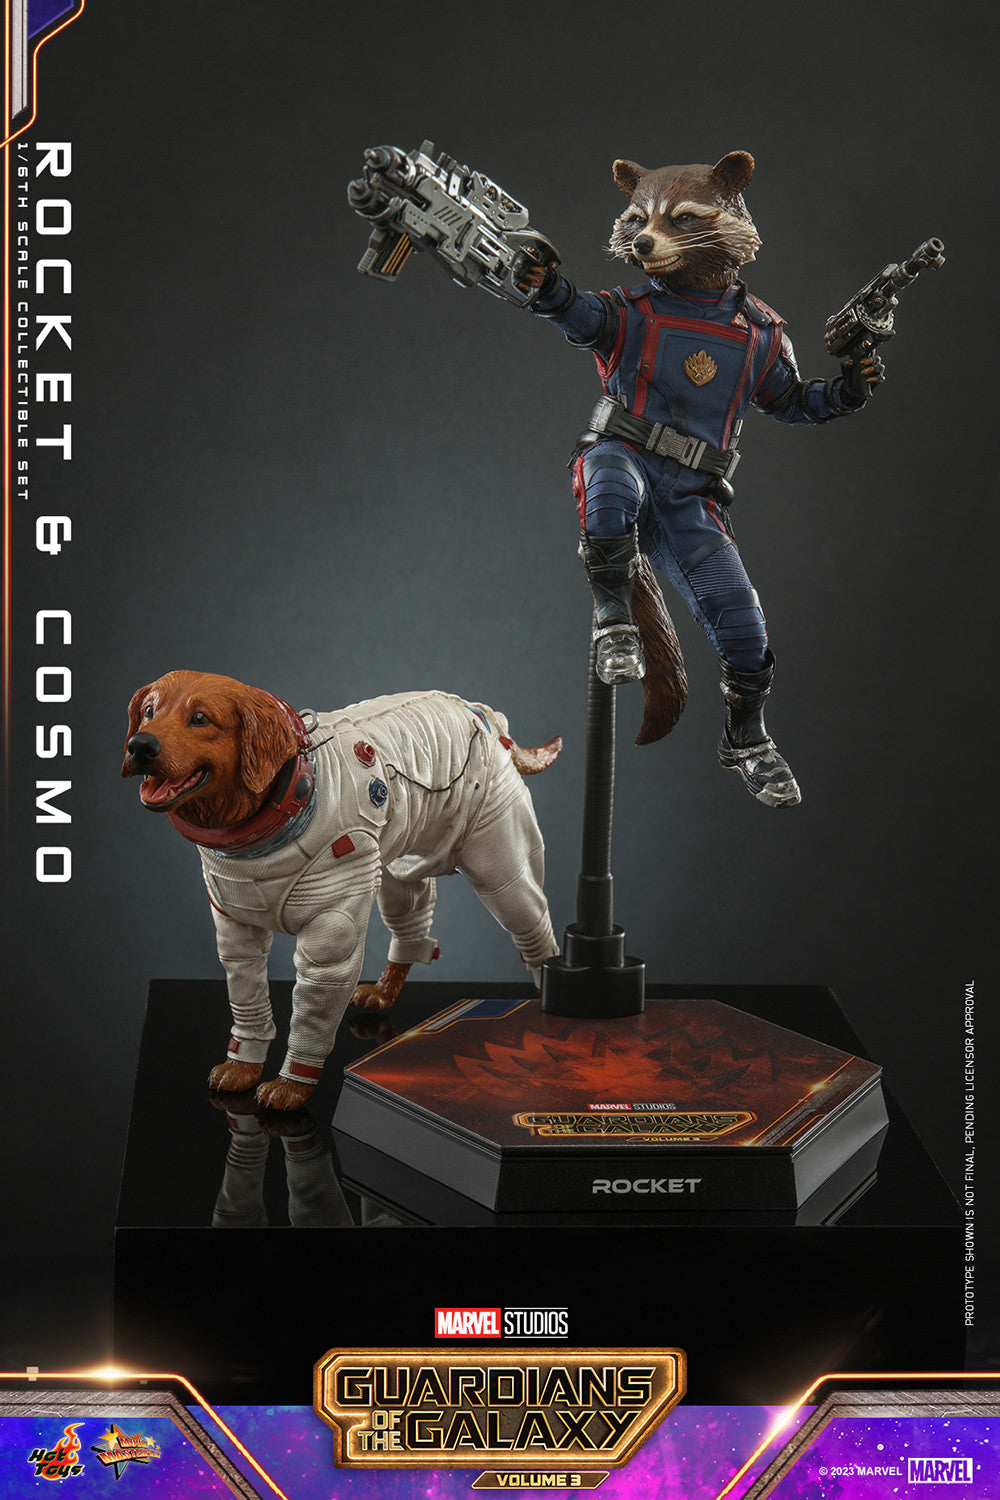 Rocket and Cosmo 1/6 Scale Figure Set by Hot Toys